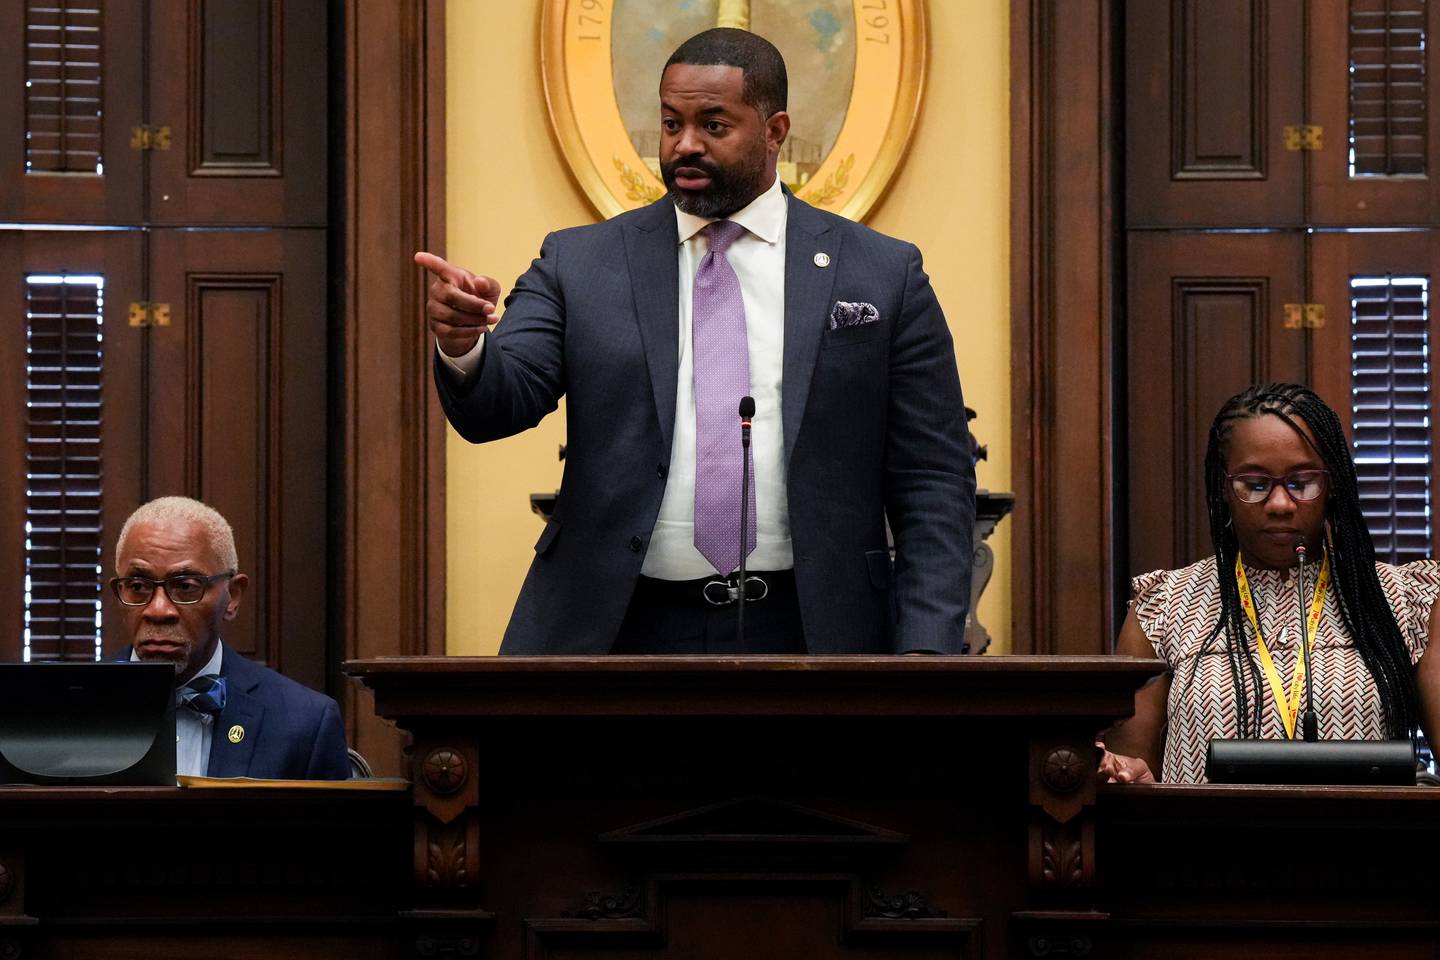 Baltimore City Council President Nick Mosby, center, conducts a budget hearing on Wednesday, June 14, 2023. The Baltimore City Council unanimously voted to shift about $12 million within Mayor Brandon Scott’s 2024 budget proposal on Wednesday, marking the first time in more than a century that council members used such financial authority.